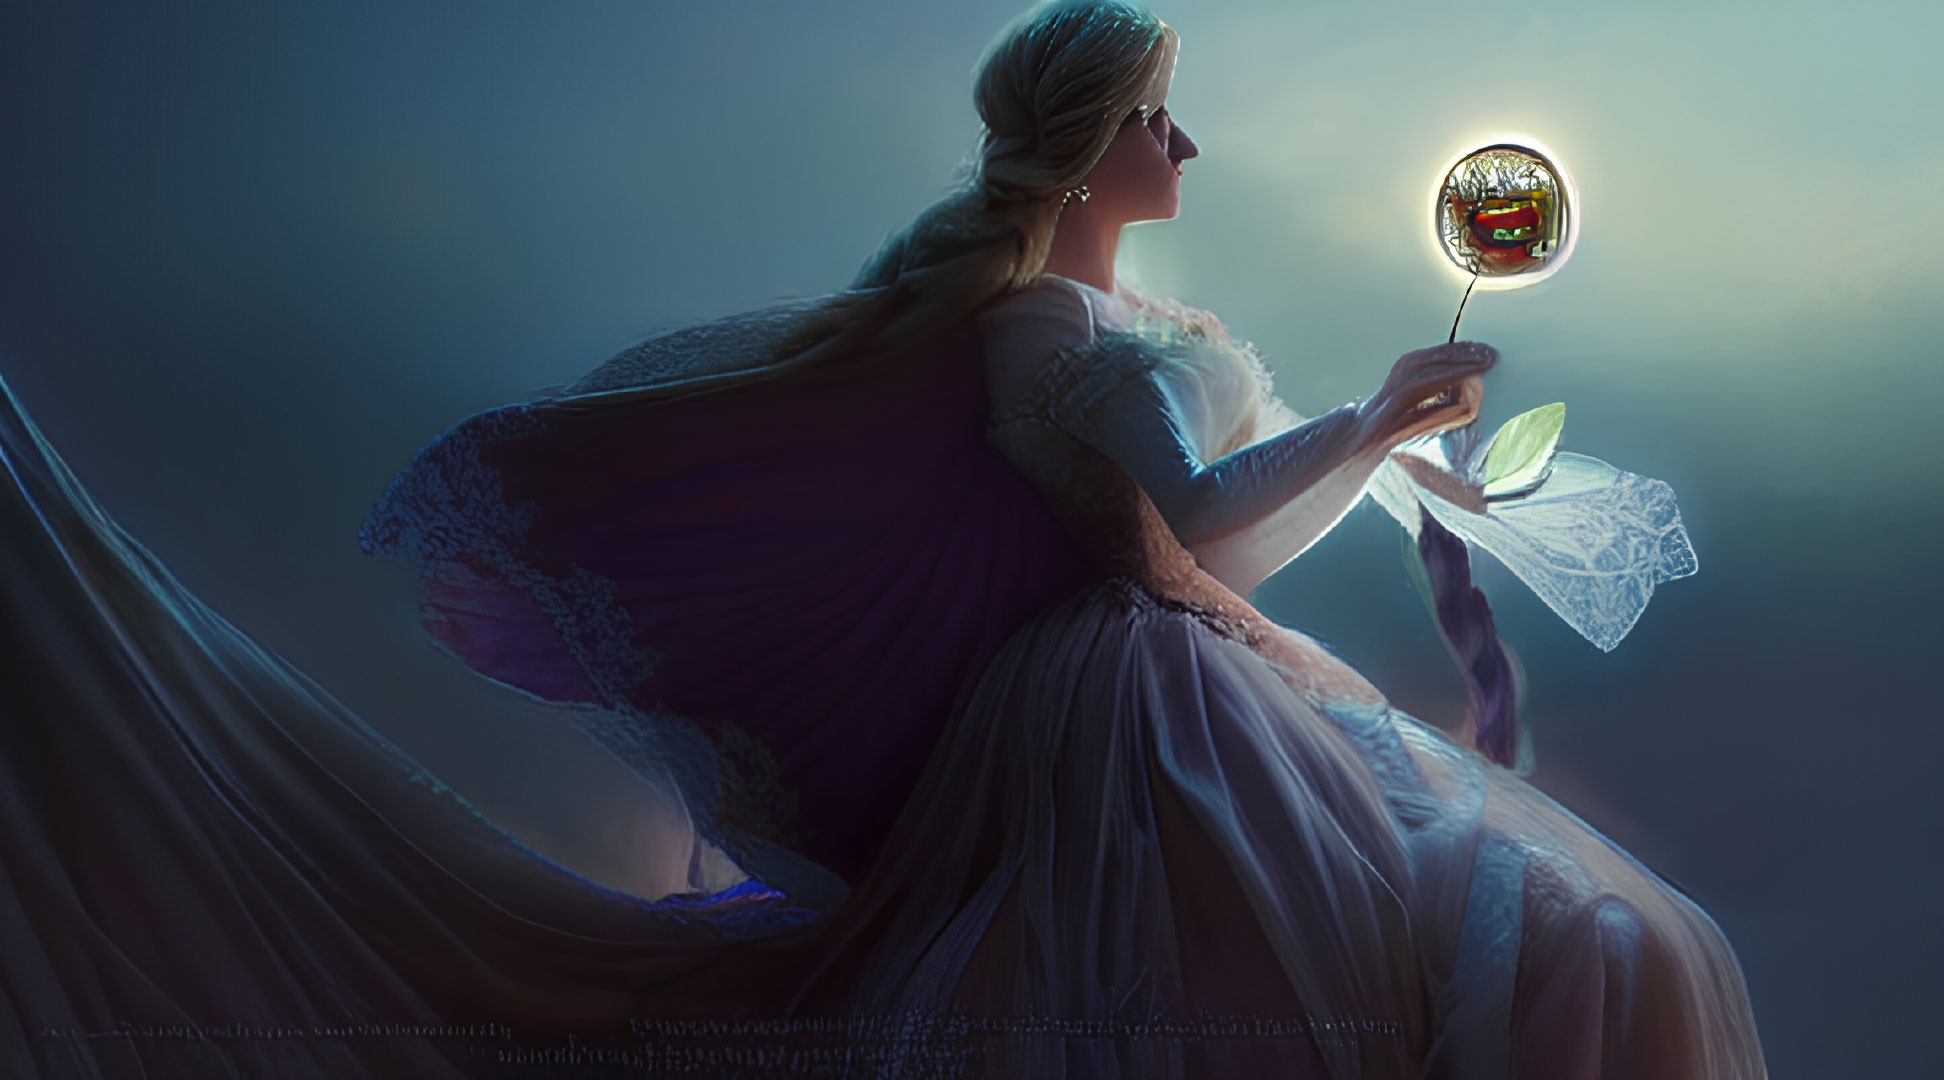 Elegant woman in gown with glowing magnifying glass in mysterious setting